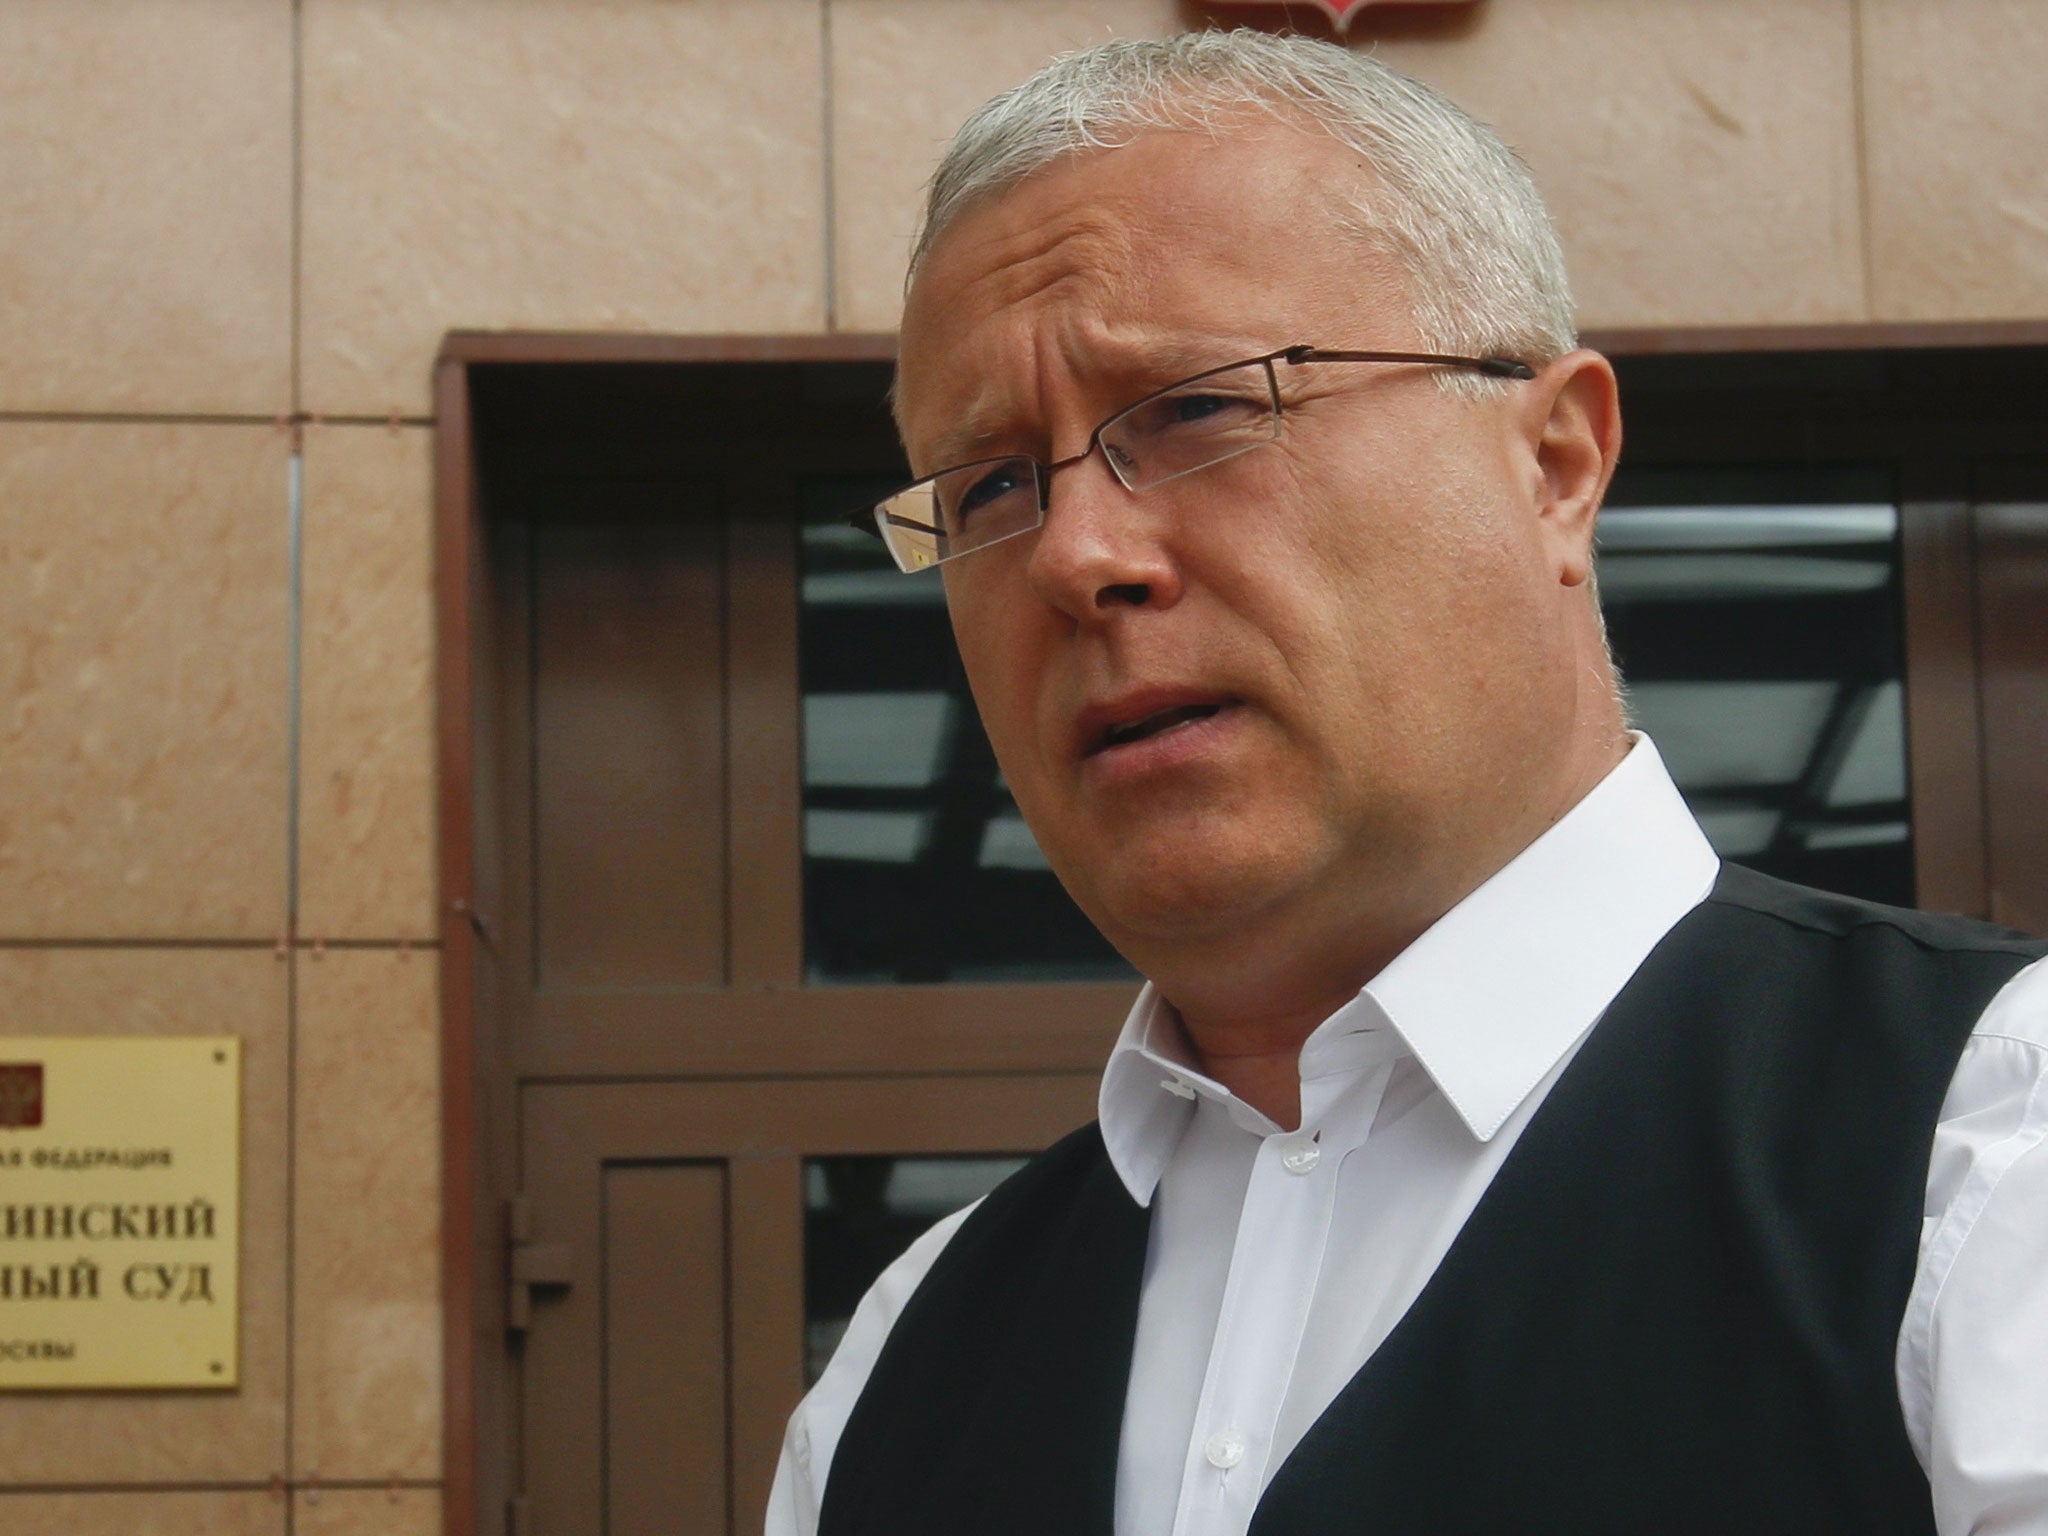 Mr Lebedev is charged with hooliganism motivated by political hatred